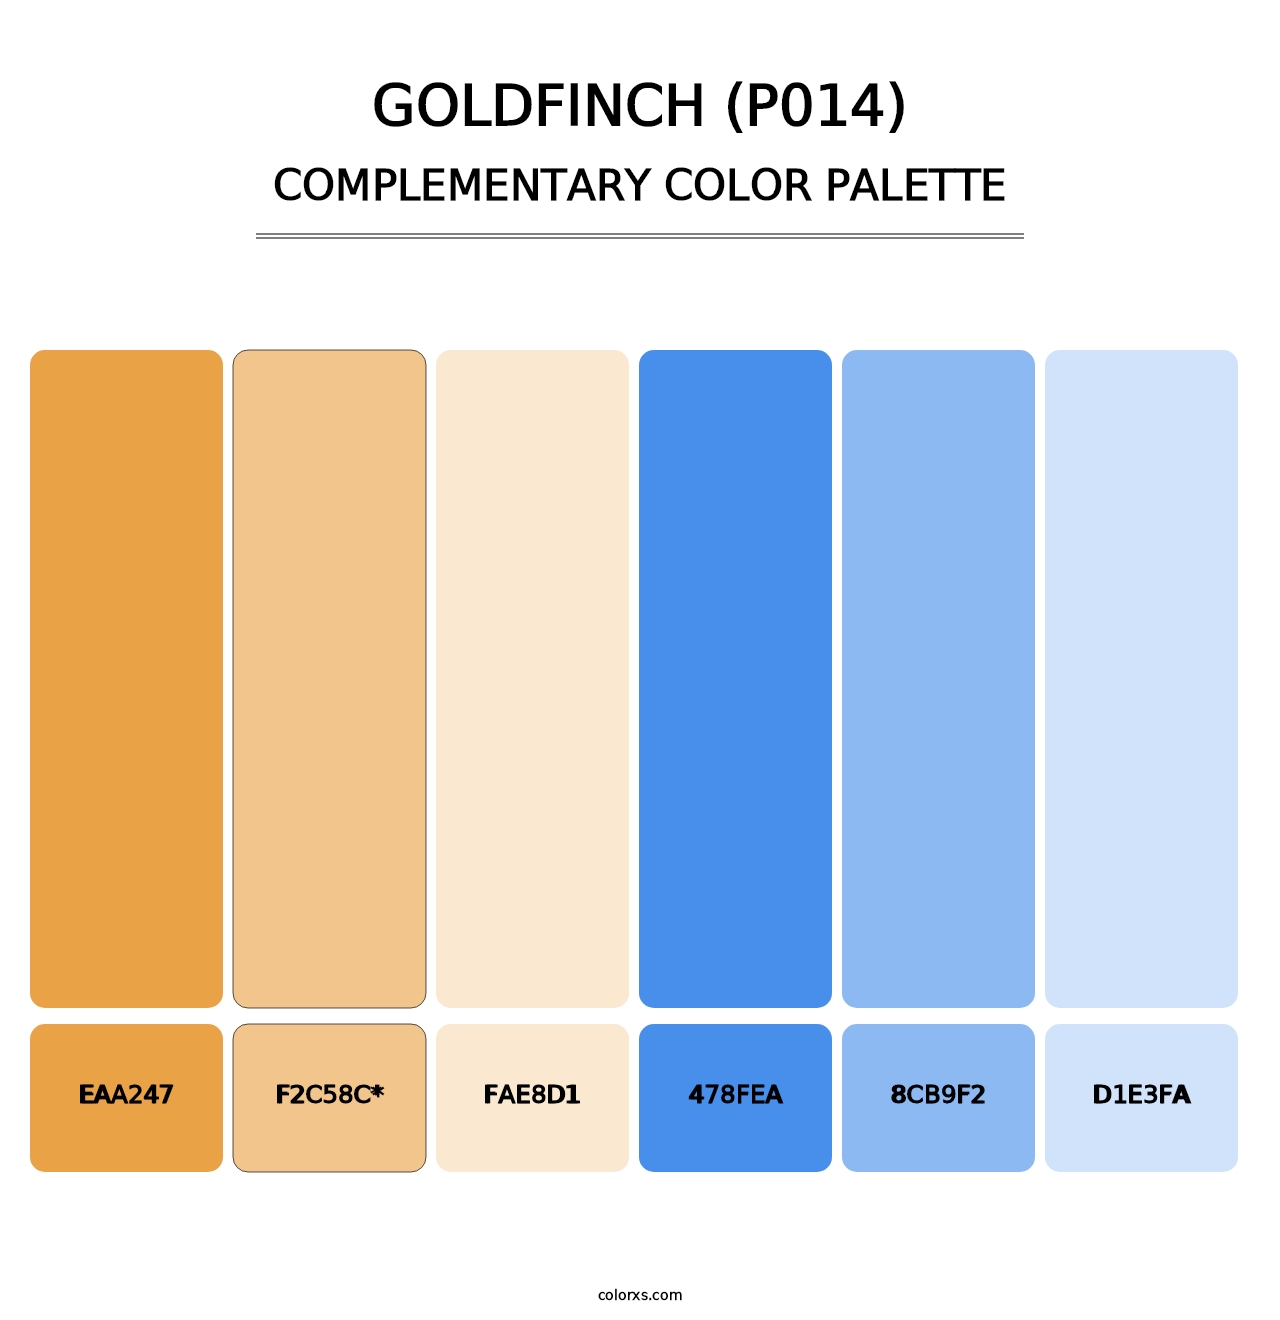 Goldfinch (P014) - Complementary Color Palette